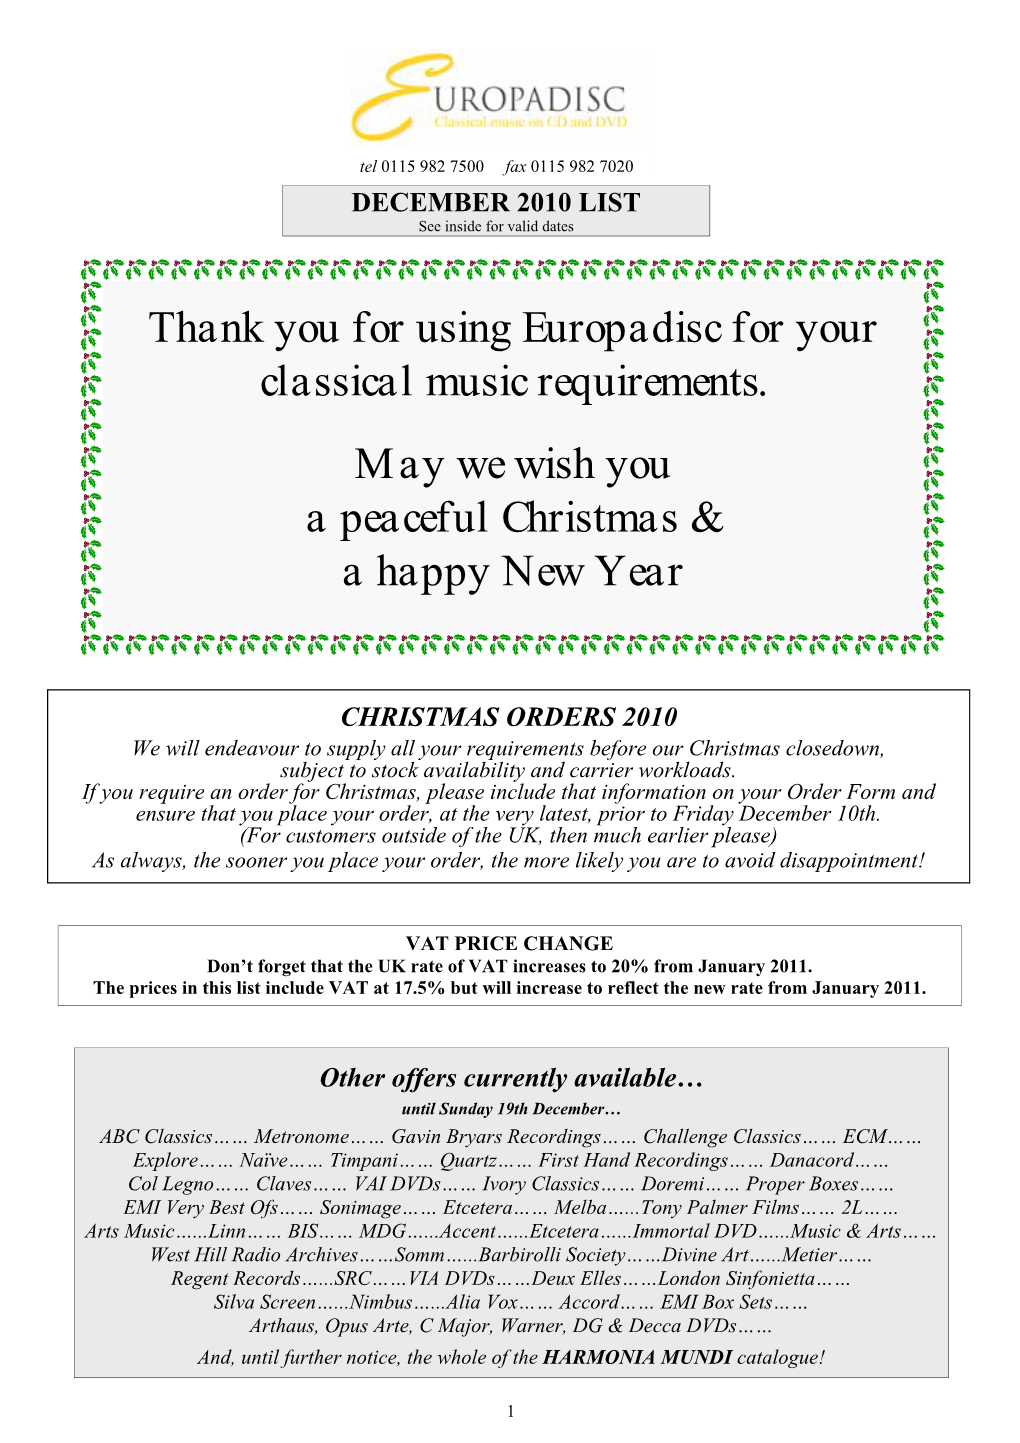 Thank You for Using Europadisc for Your Classical Music Requirements